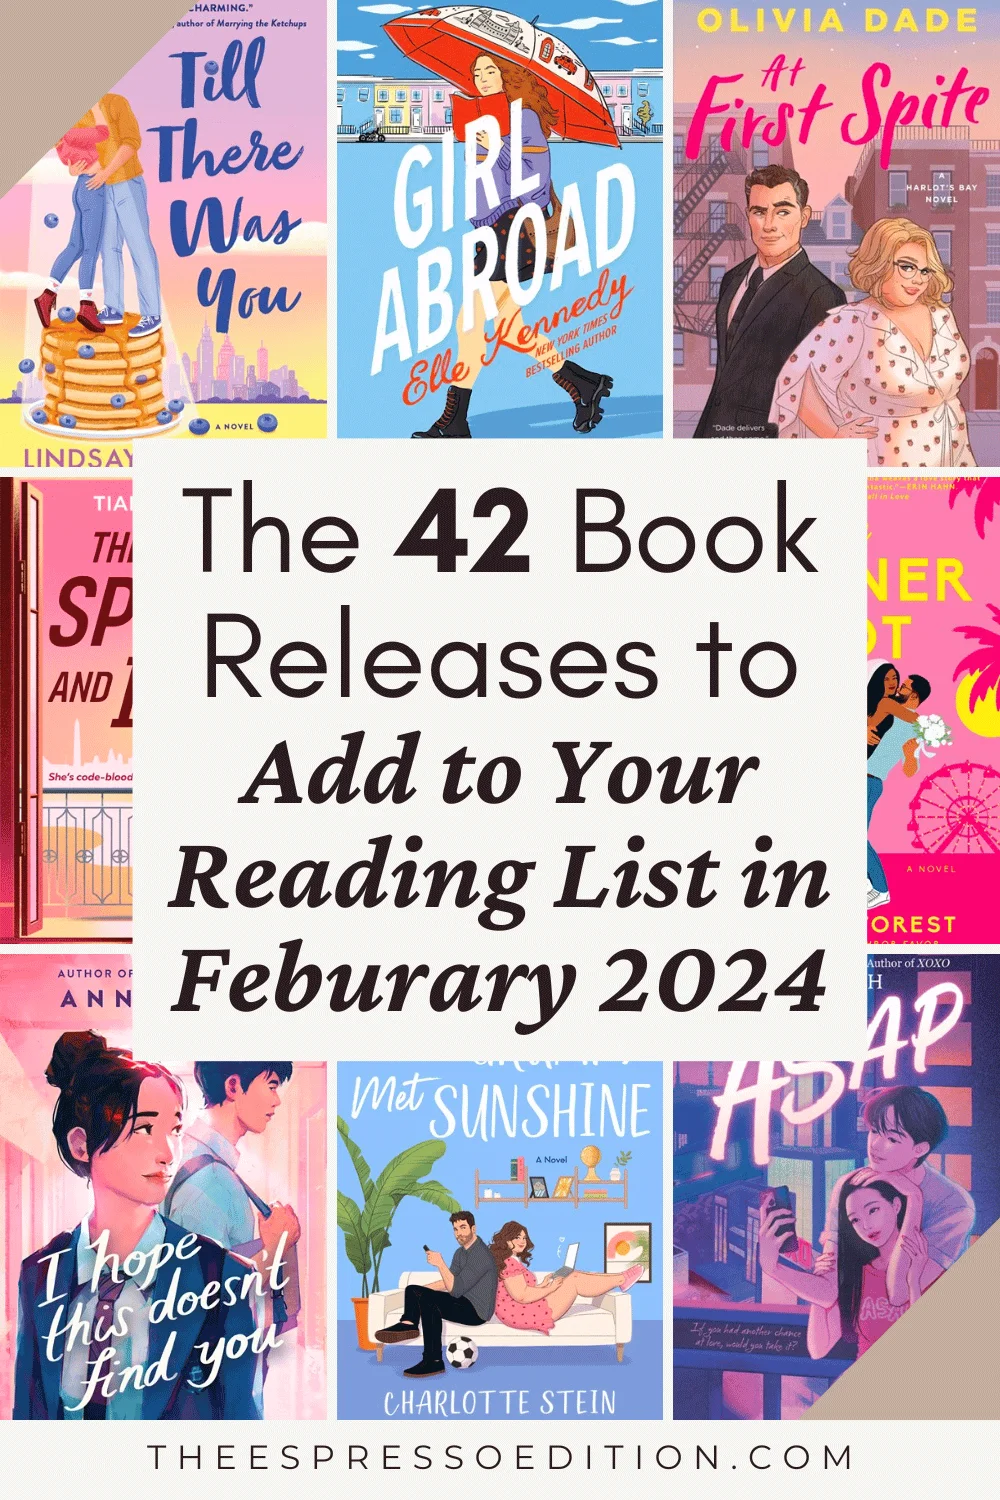 The 42 Book Releases to Add to Your Reading List in February 2024 by The Espresso Edition cozy bookish blog